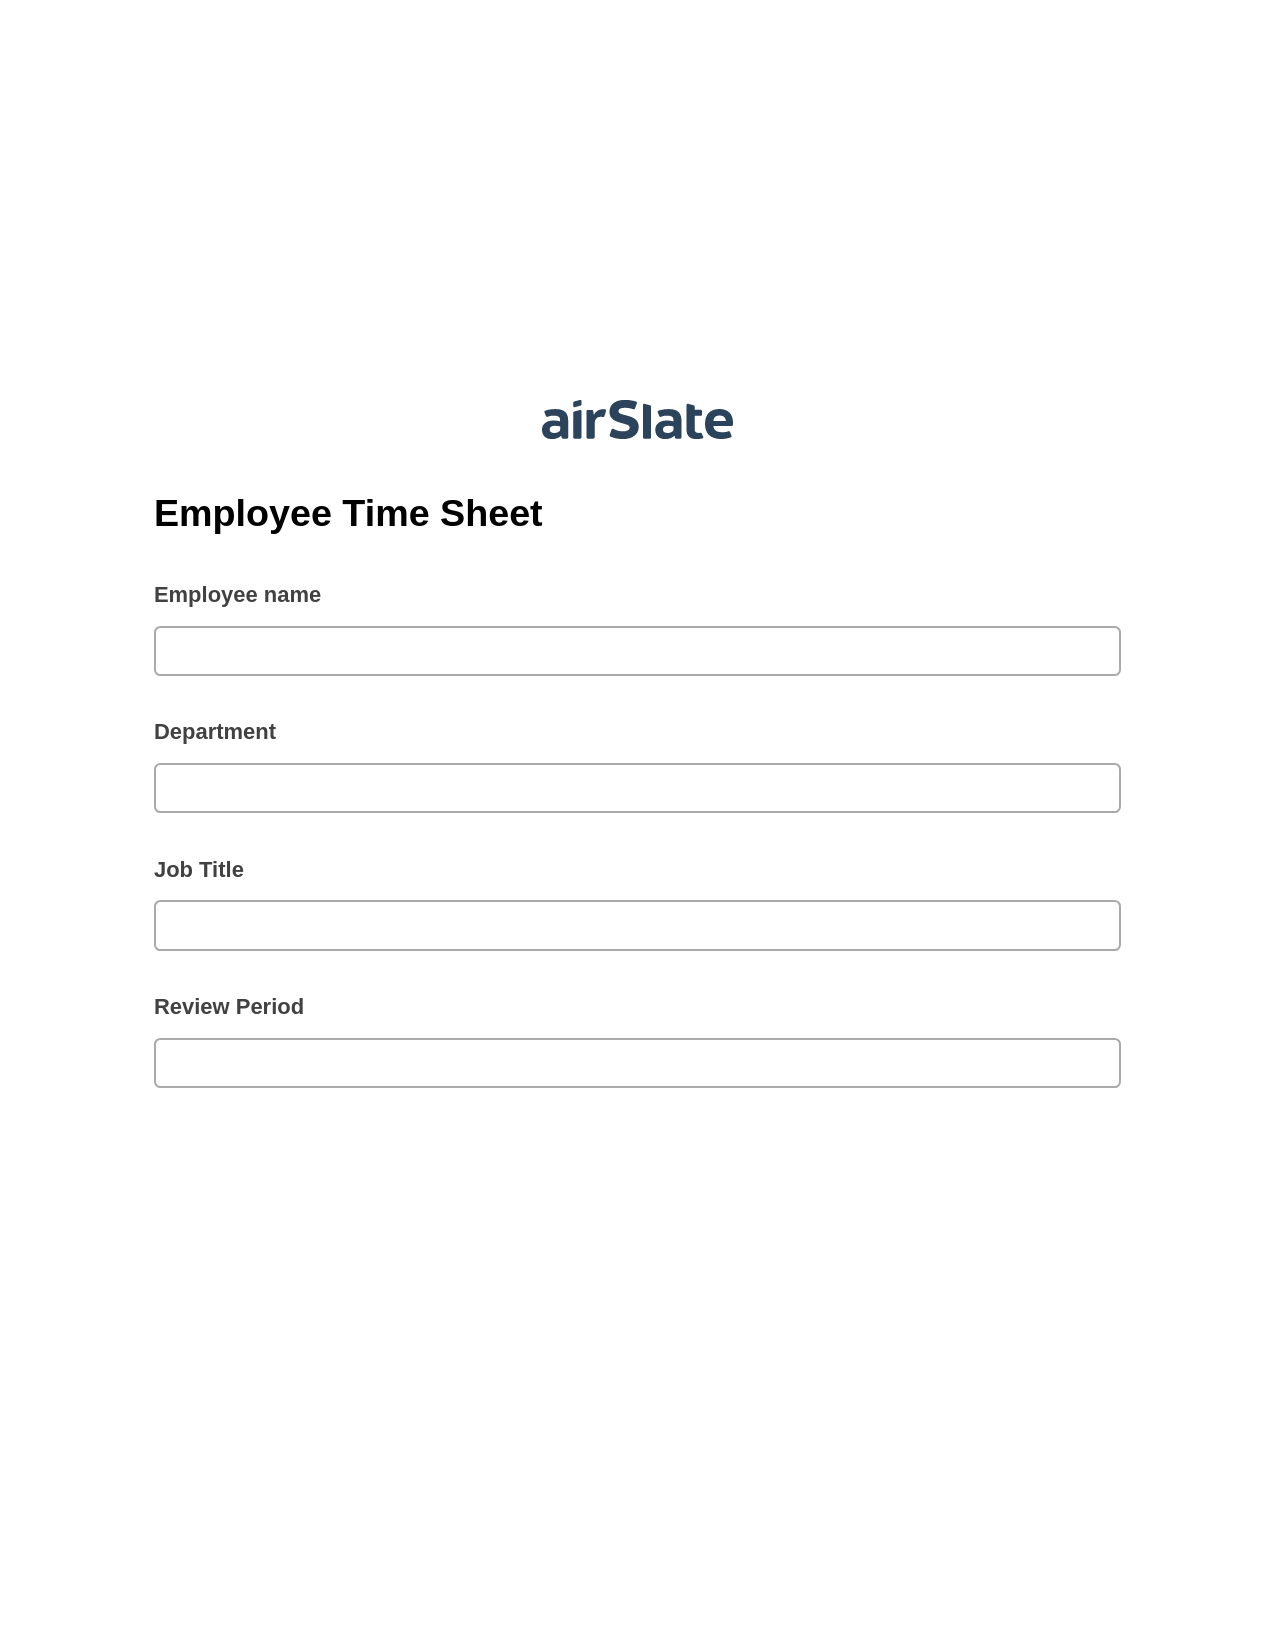 Multirole Employee Time Sheet Pre-fill from another Slate Bot, Update Audit Trail Bot, Export to Smartsheet